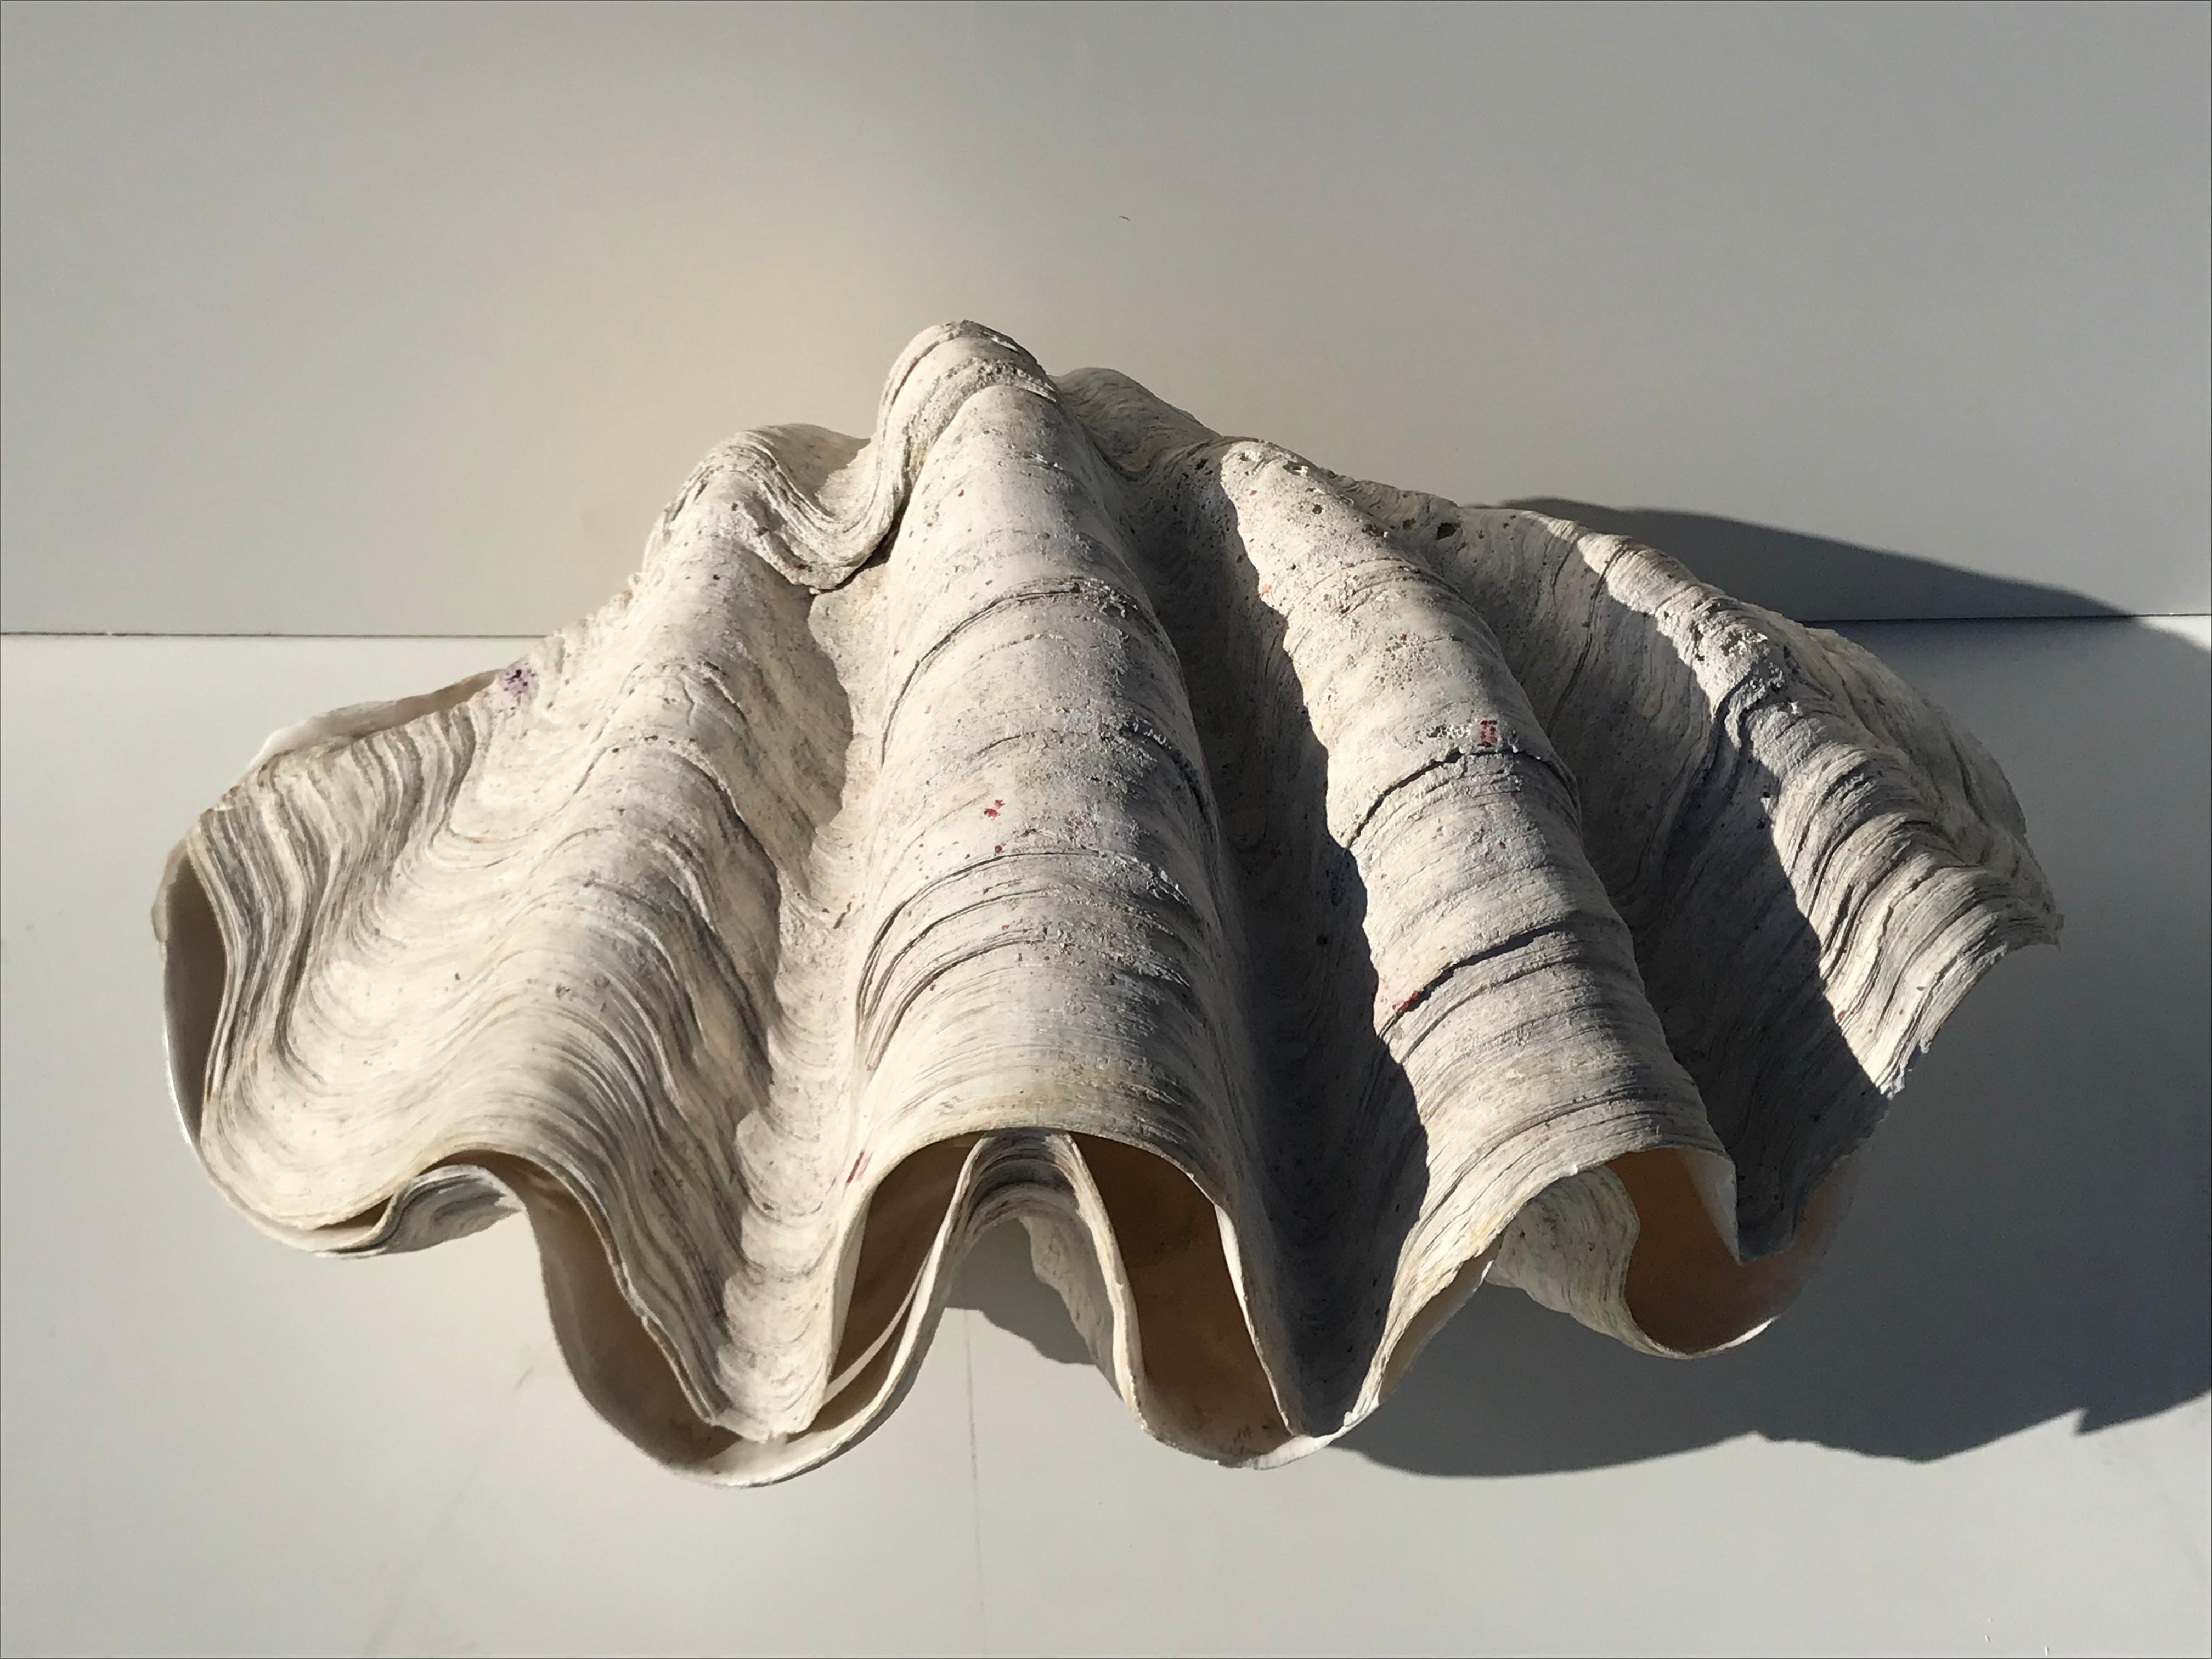 Pair of giant clam shells. When a shell gets this big it forms grotesque formation on the back but this pair is in pristine condition that belongs to a museum. Can be used as a planter or with a light inside as a decorative floor lamp. Last two